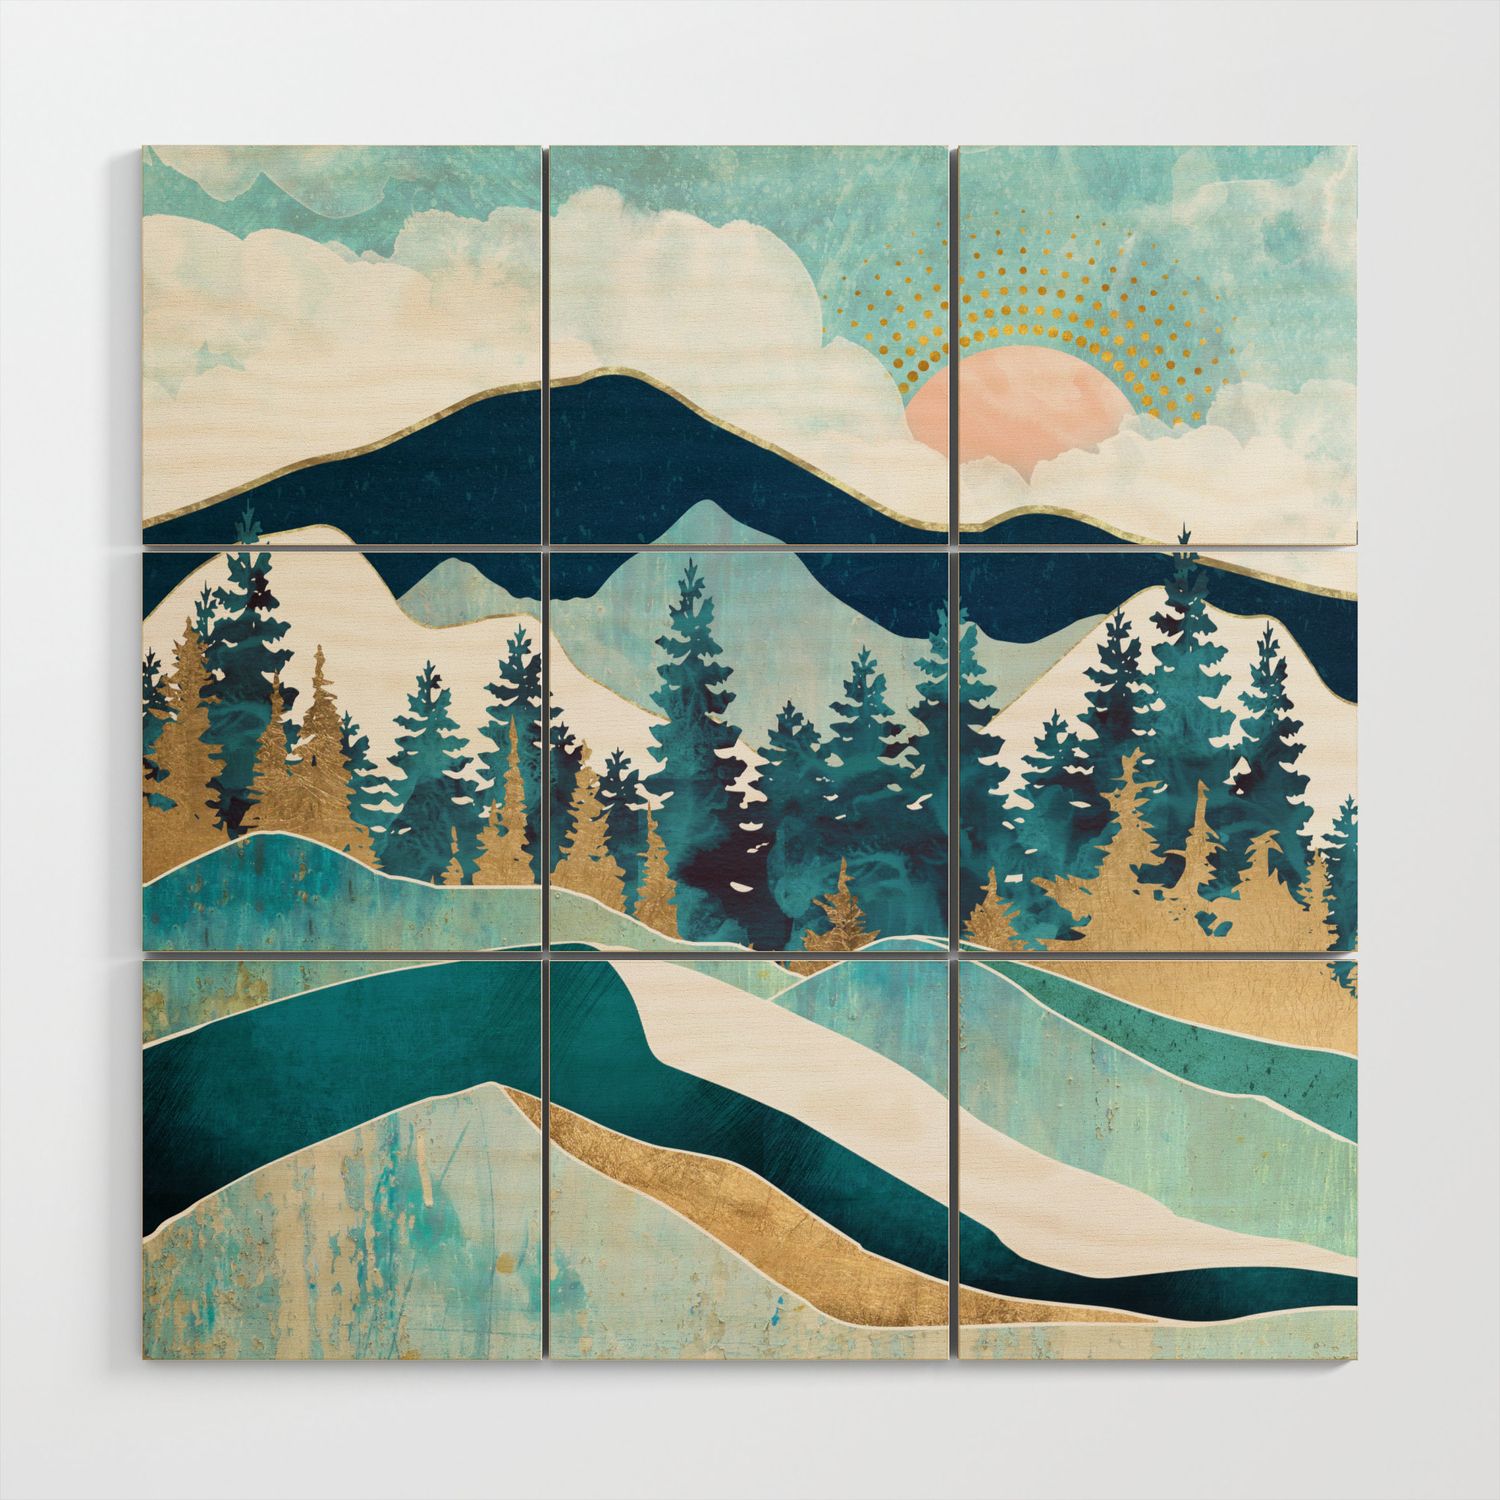 Summer Forest Wood Wall Artspacefrogdesigns | Society6 In Current Summers Wood Wall Art (View 5 of 20)